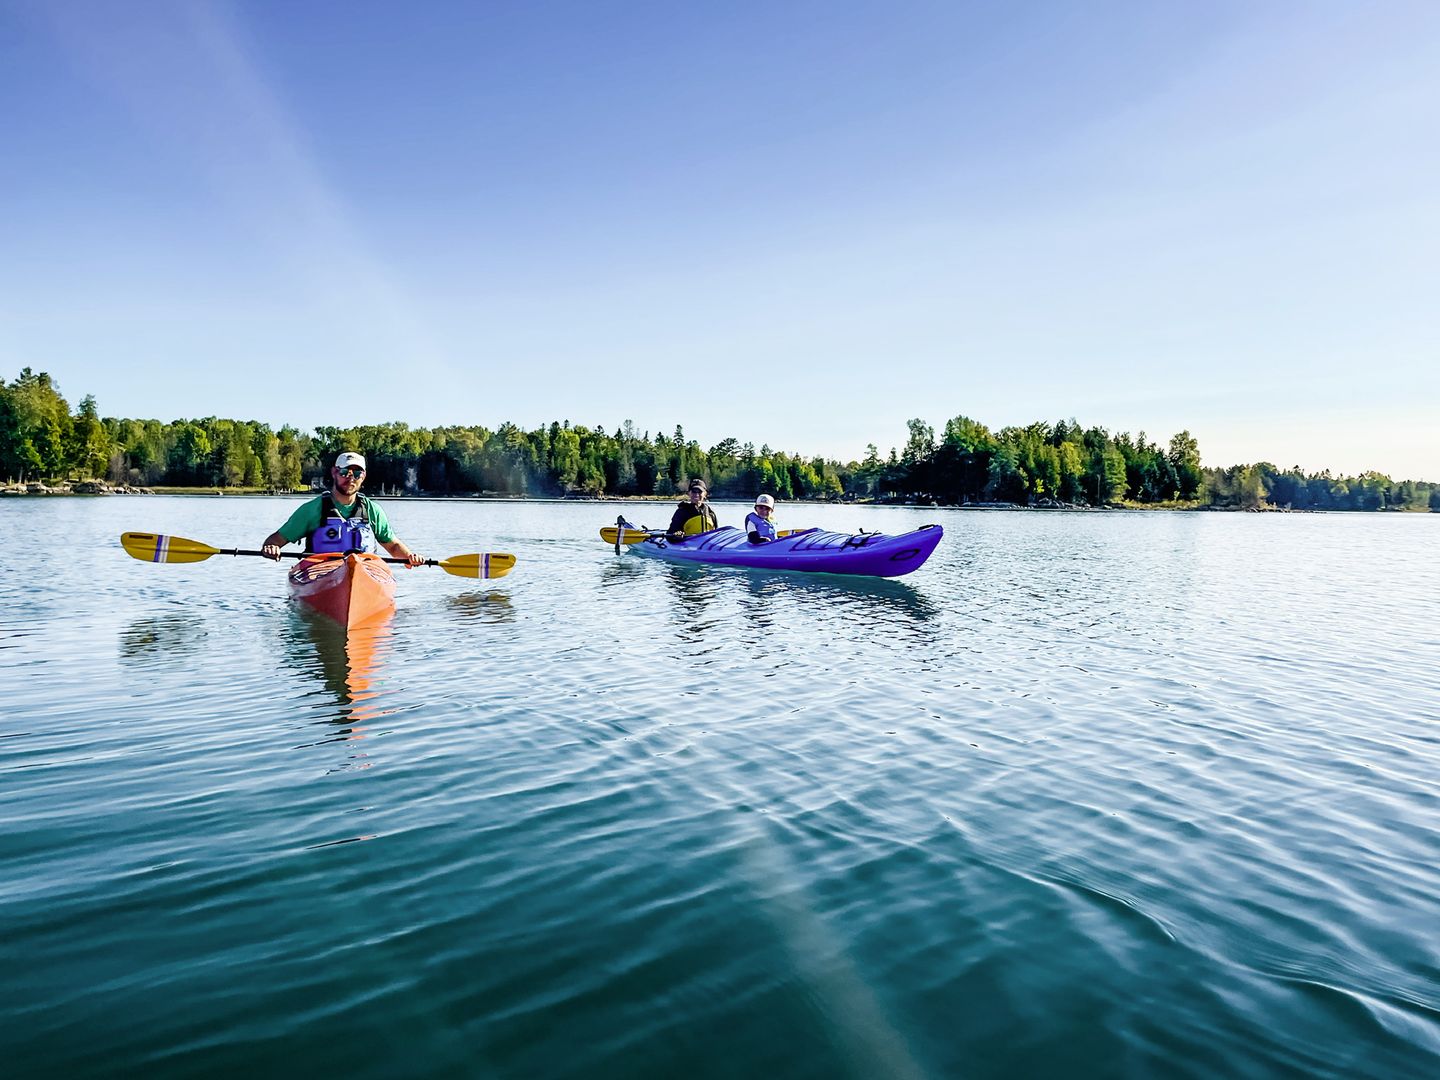 Two kayaks, an orange solo kayak, and a blue tandem kayak with a parent and child, take a quick break for the camera while on a Little Dipper kayak tour in Lake Huron's Les Cheneaux Island.